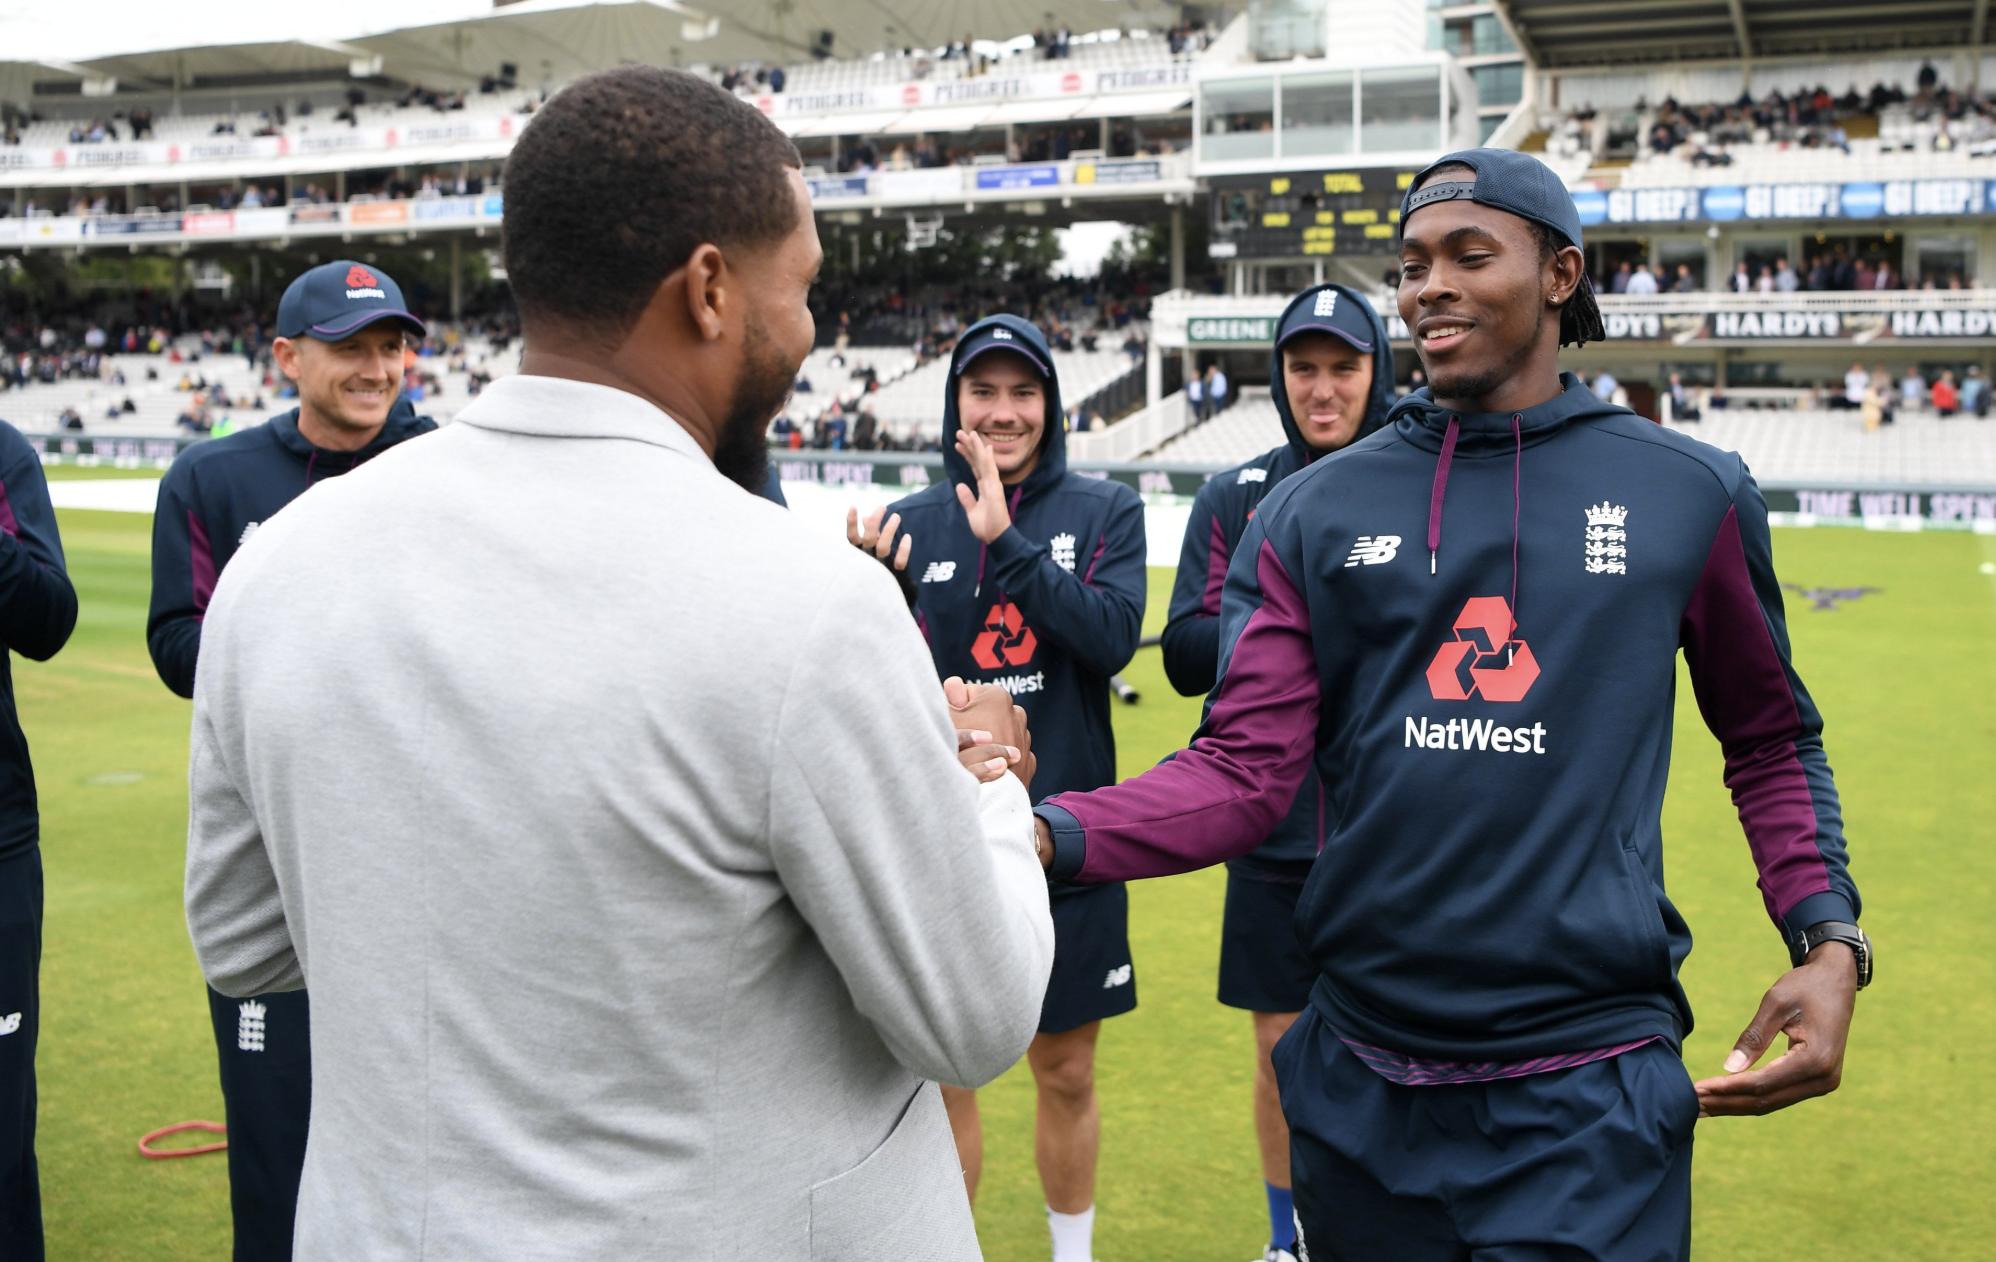 Jofra Archer received his test cap from Chris Jordan at Lord's .